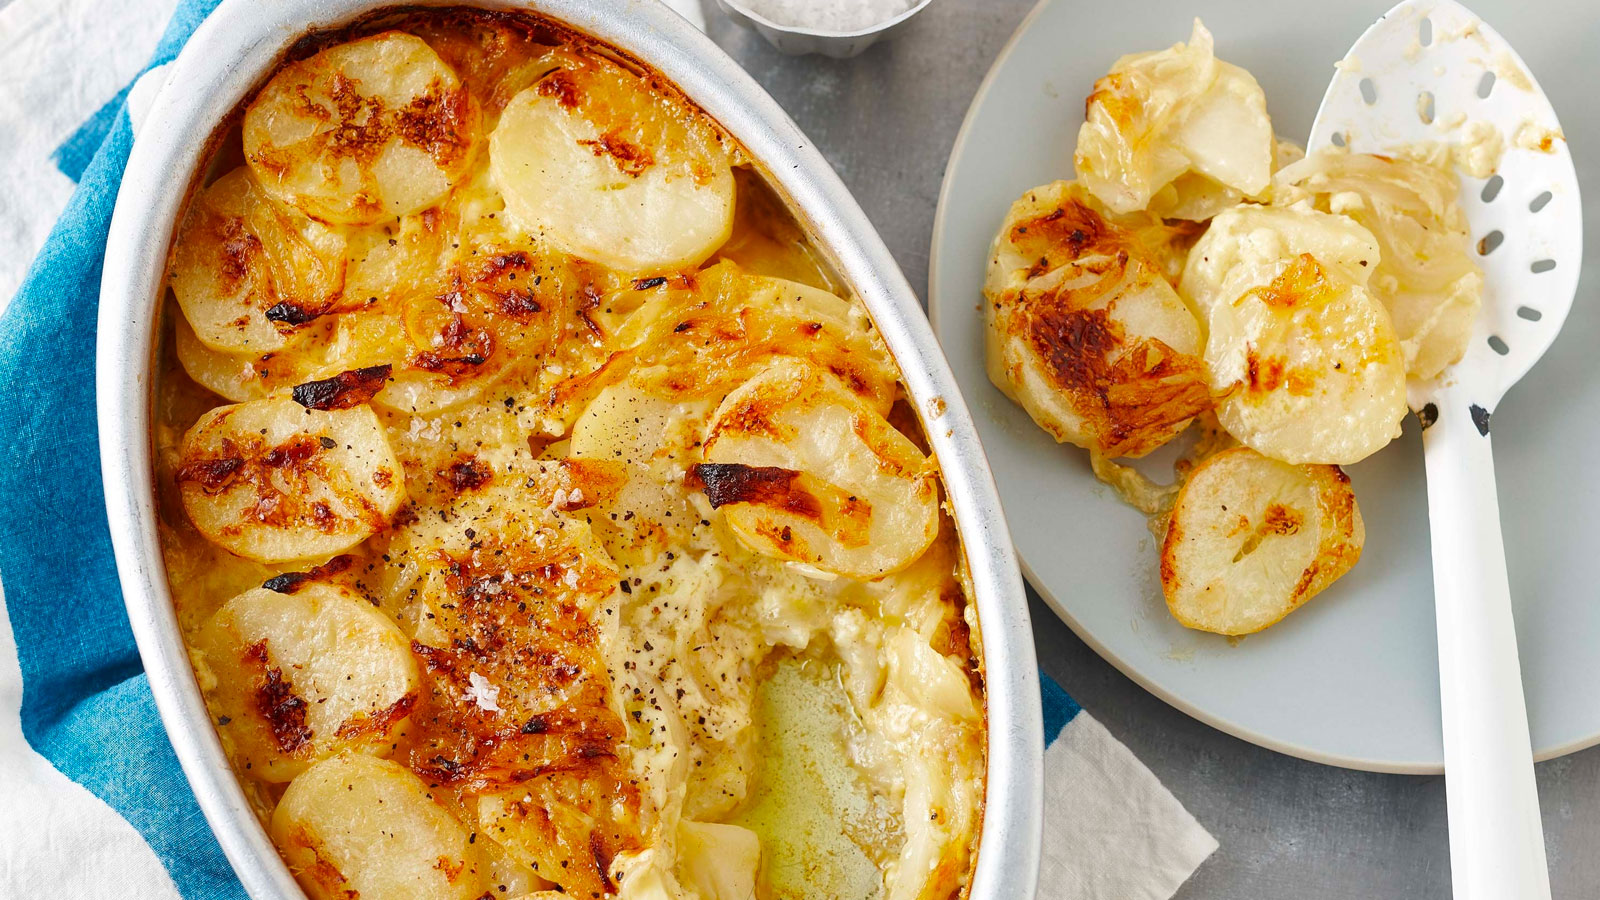 Eat at an Endless Buffet and We’ll Guess Your Age and Gender 50 scalloped potatoes